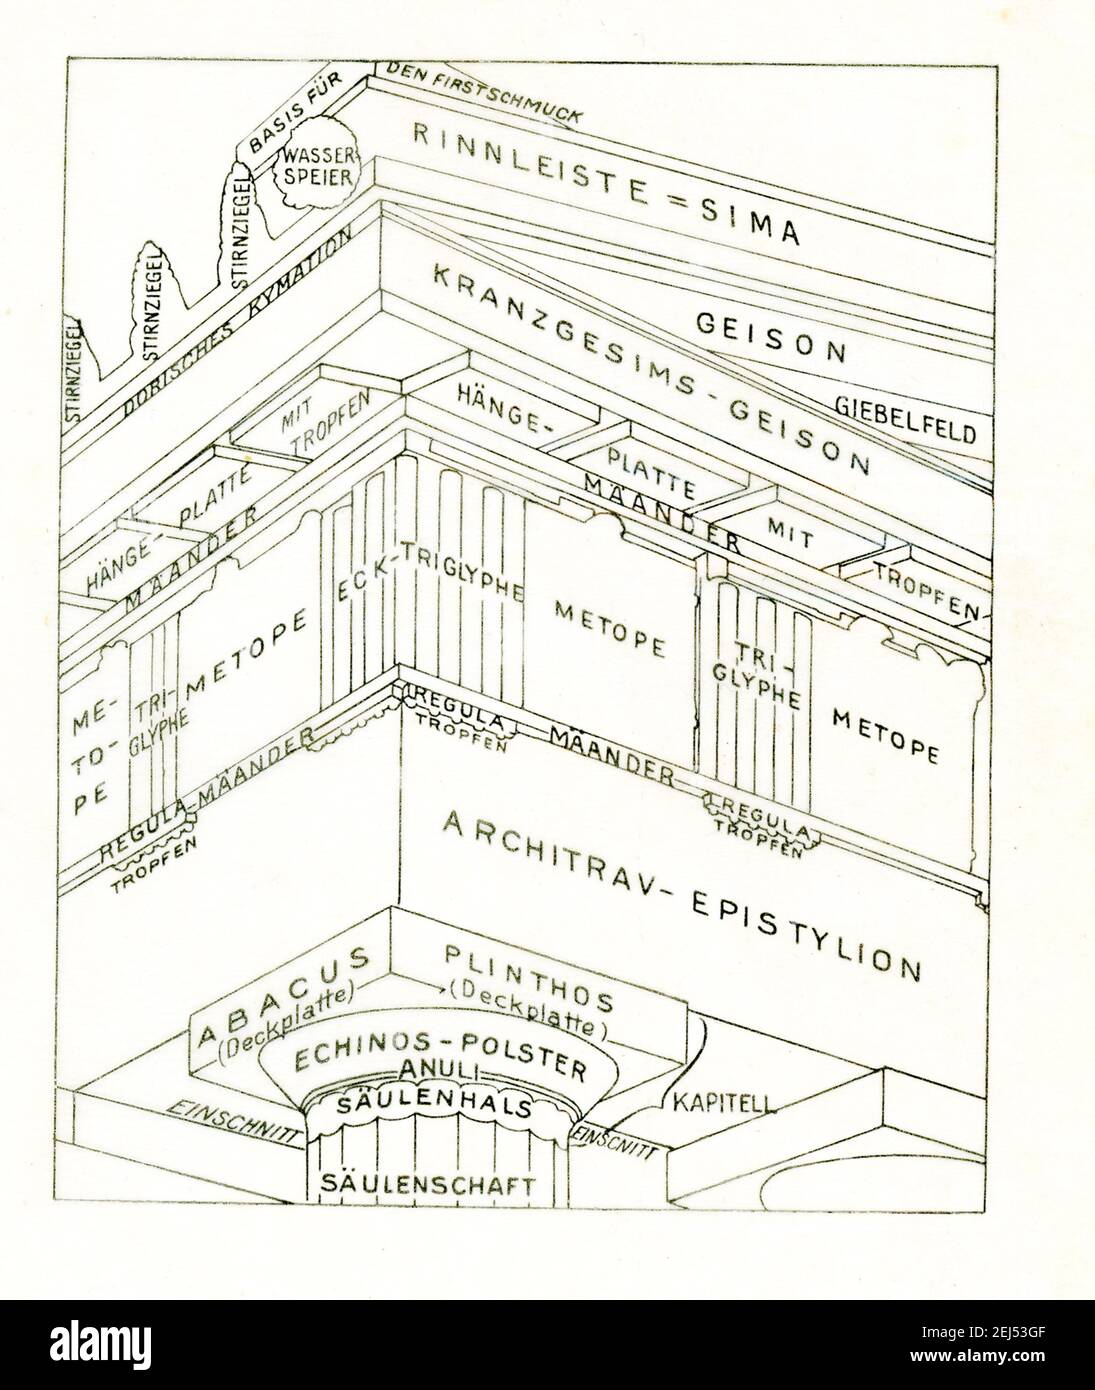 This diagram labels all the parts (in German) of the entablature that is part of the Parthenon. The diagram is a copy of Ludwig Peter Fenger’s work. The Parthenon is the temple that dominates the hill of the Acropolis at Athens. Built in the mid-5th century BC,  it was dedicated to the Greek goddess Athena. This early 1900s diagram shows a corner of the Parthenon area with stone panels called metopes that were separated from one another by triglyphs. The scenes were mythological and legendary. To paint the sections, the ancients melted color dyes into a hot wax solution and then applied it to Stock Photo